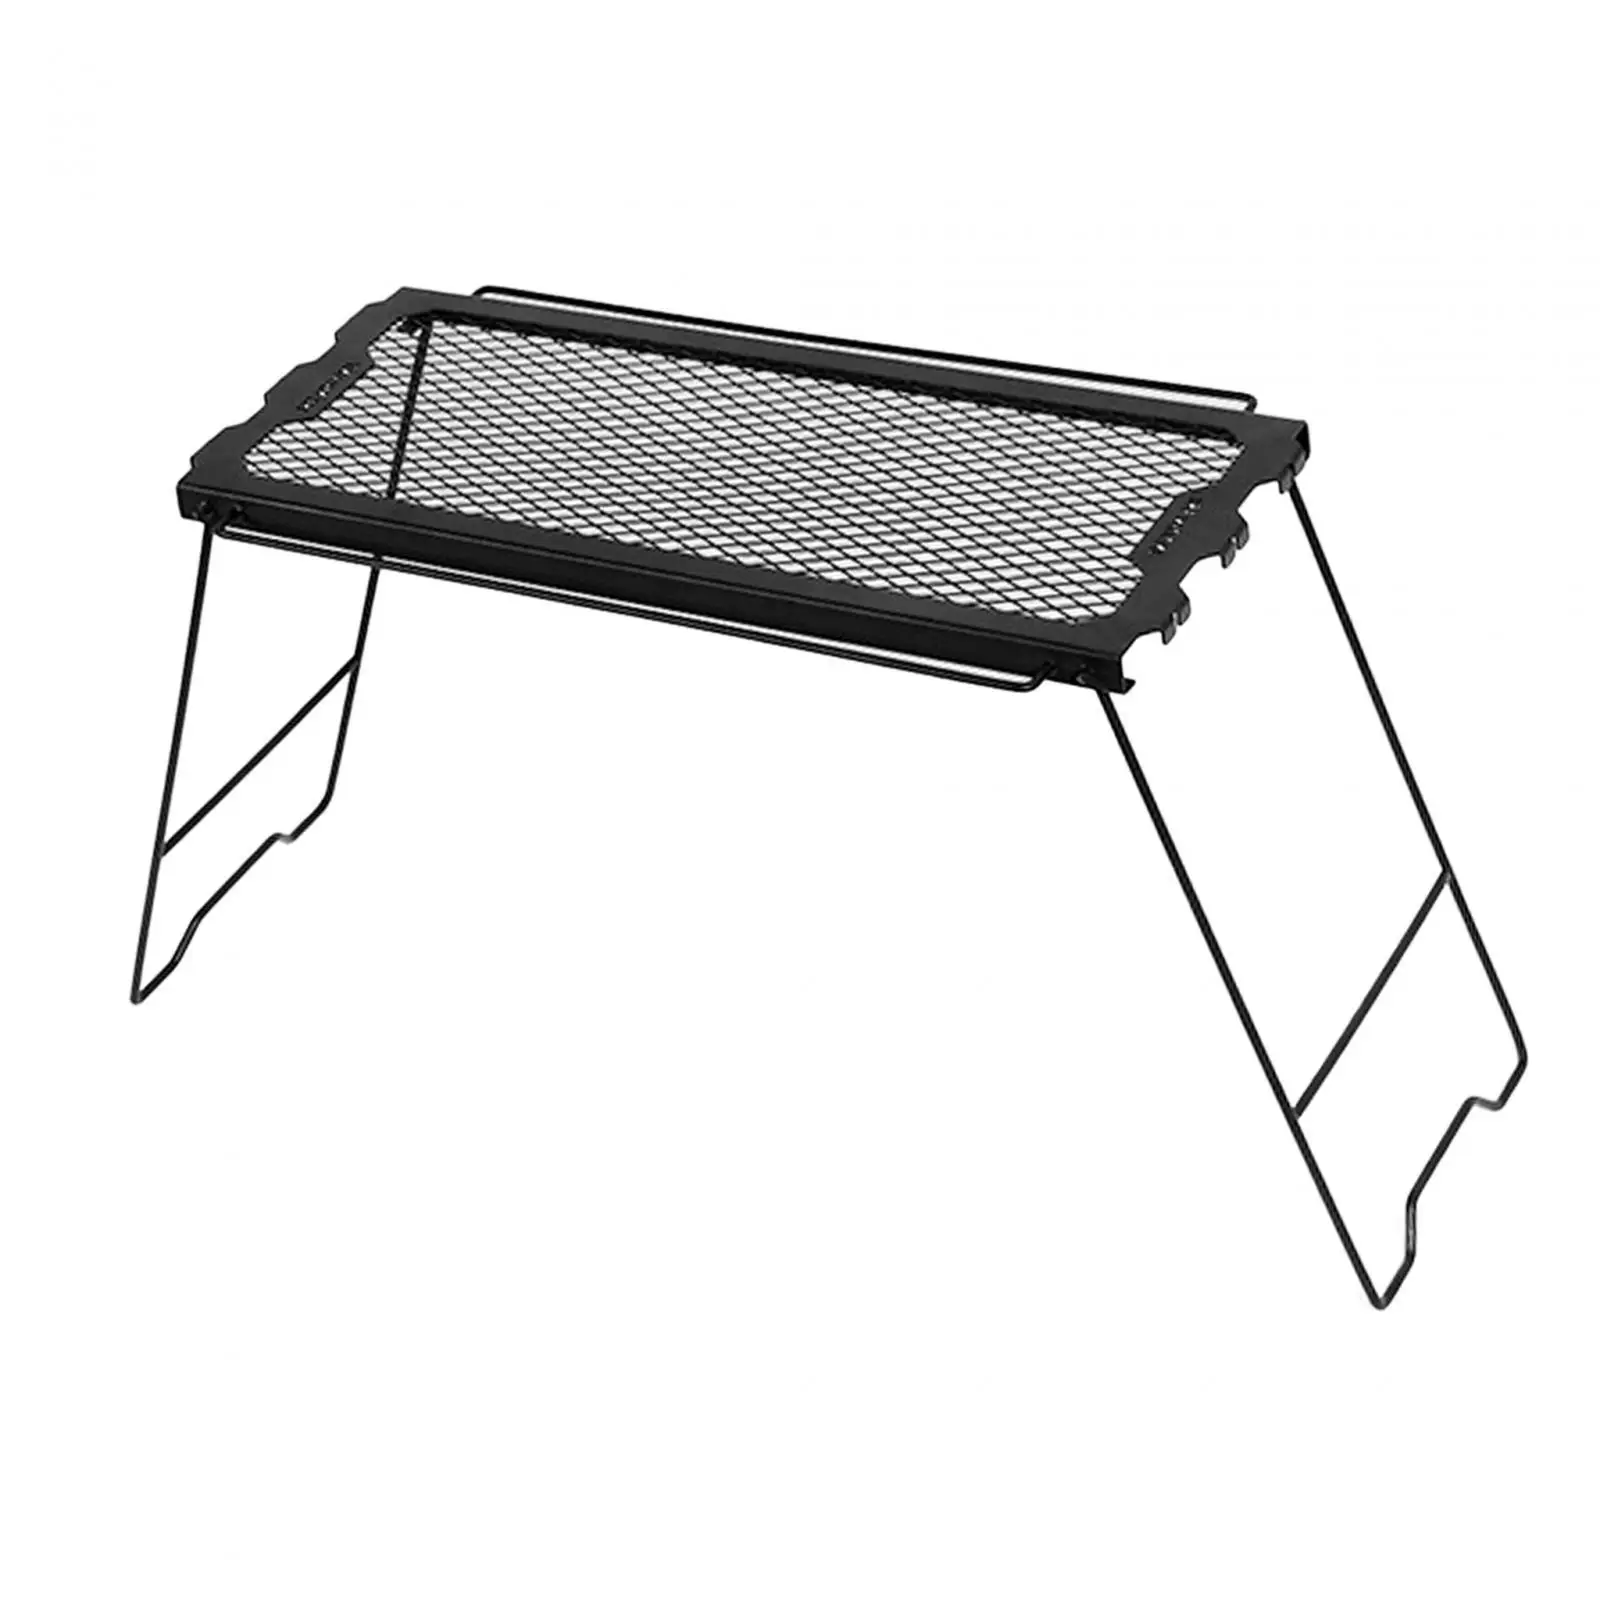 Folding Camping Table Picnic Camping Cooking Grate for Garden Backpacking RV